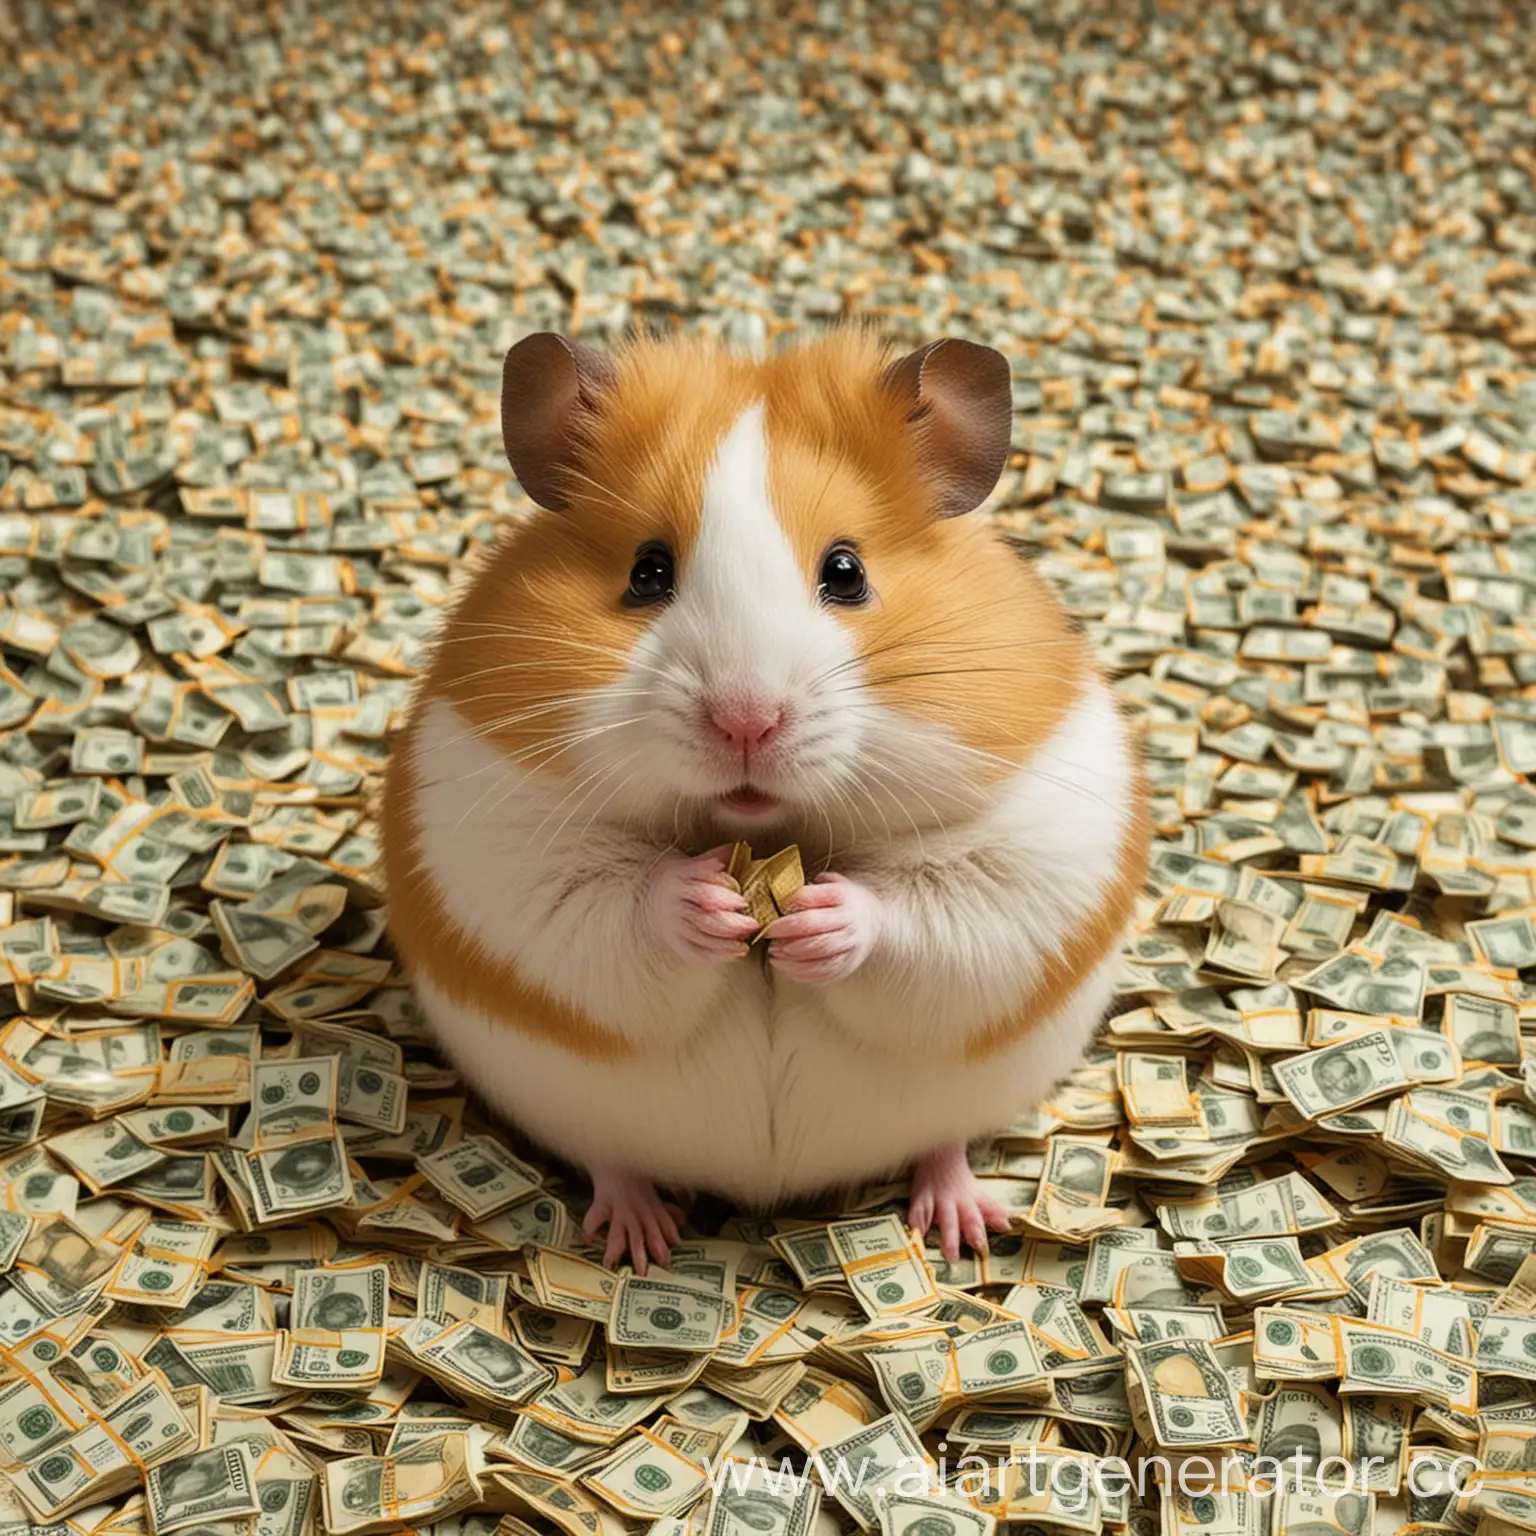 the hamster was covered with a mountain of money
